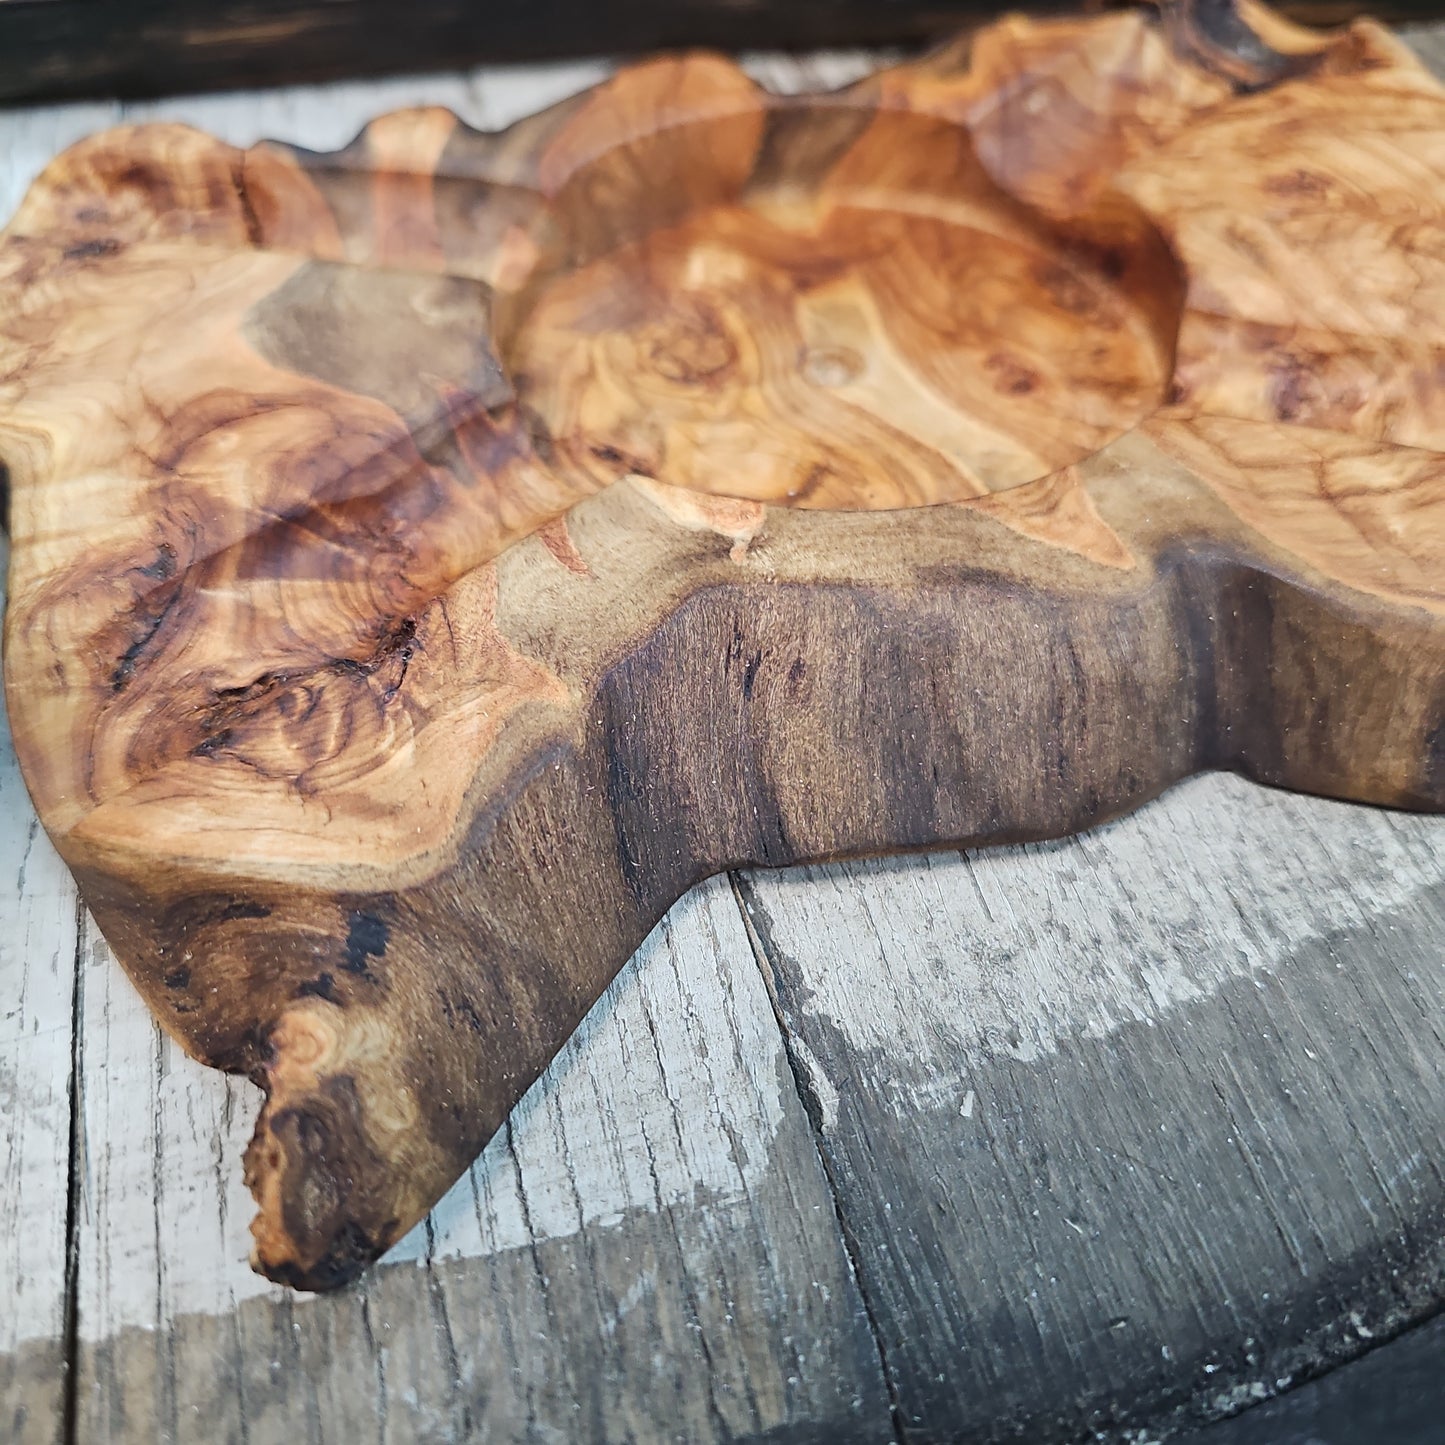 Live Edge Ash Tray 4 cigar holder by Rocky Top Designs